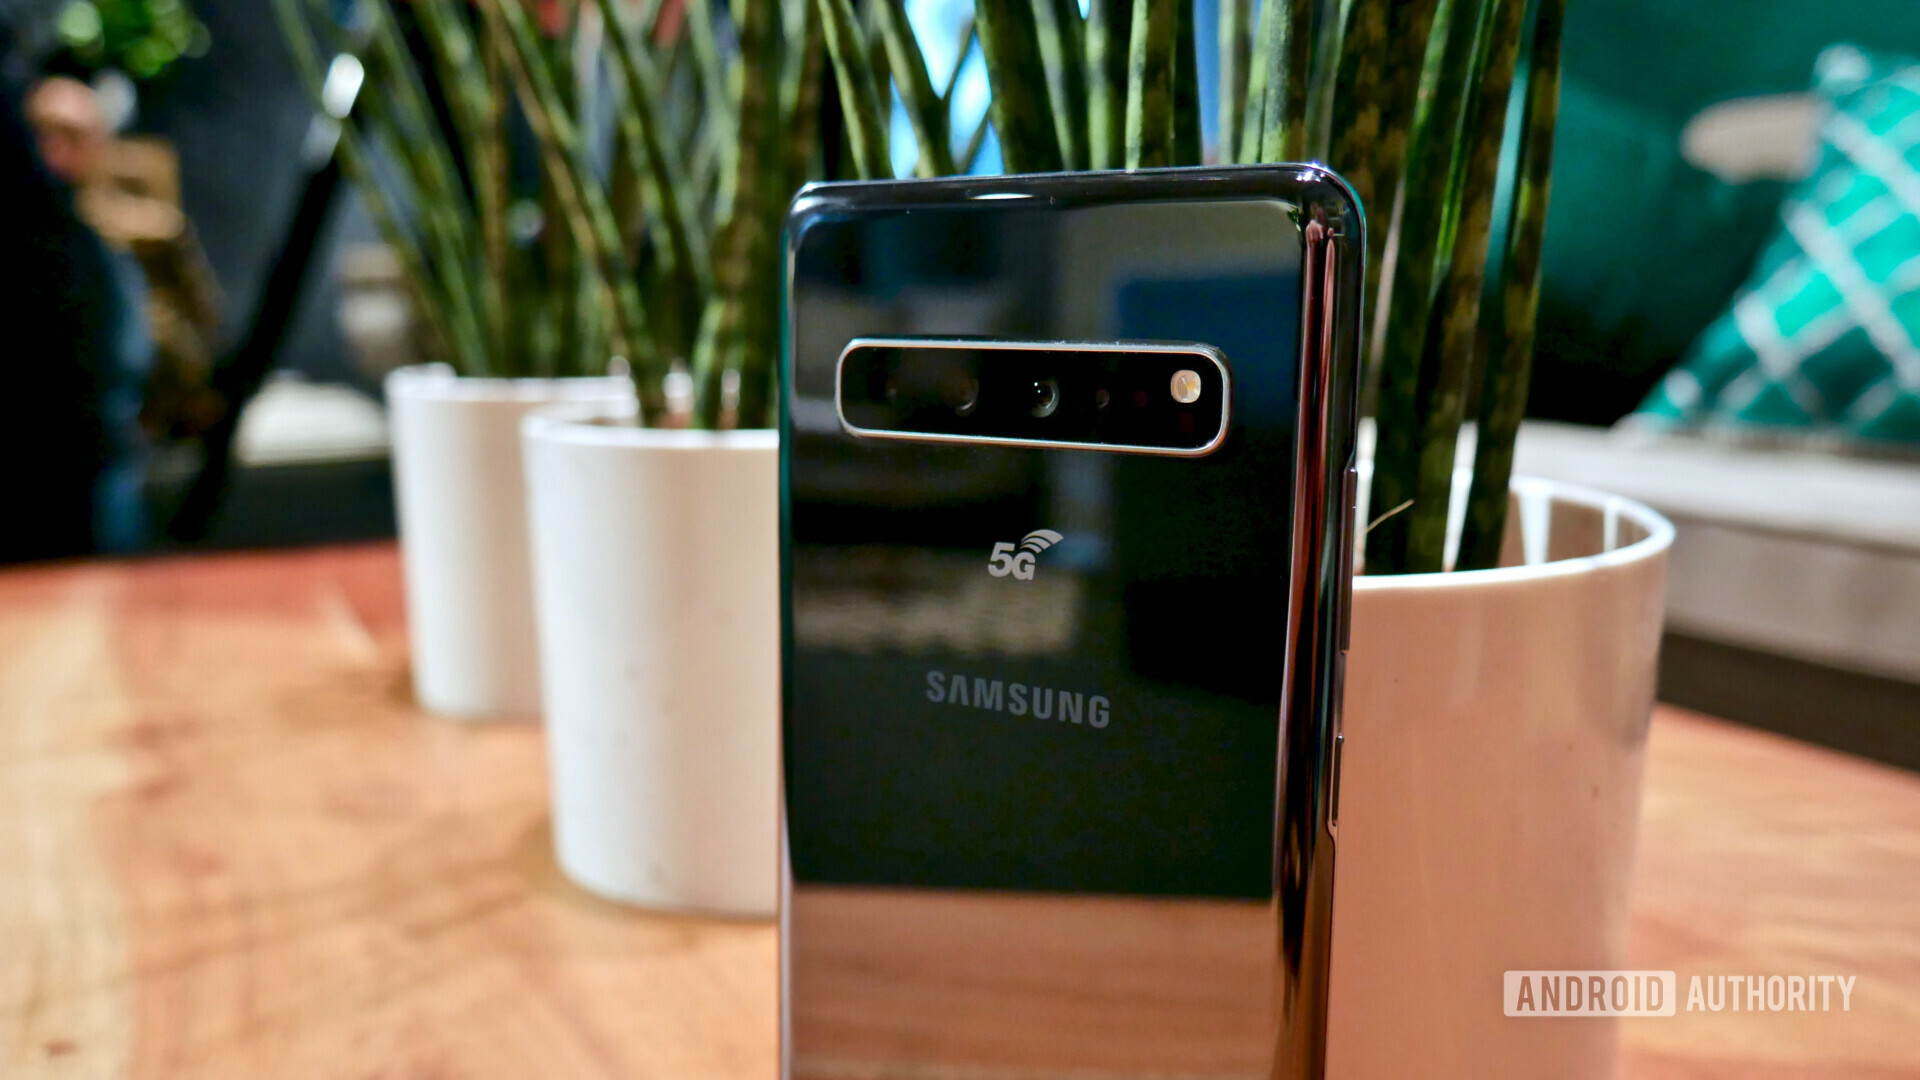 Samsung Galaxy S10 5g Much More Than Just 5g